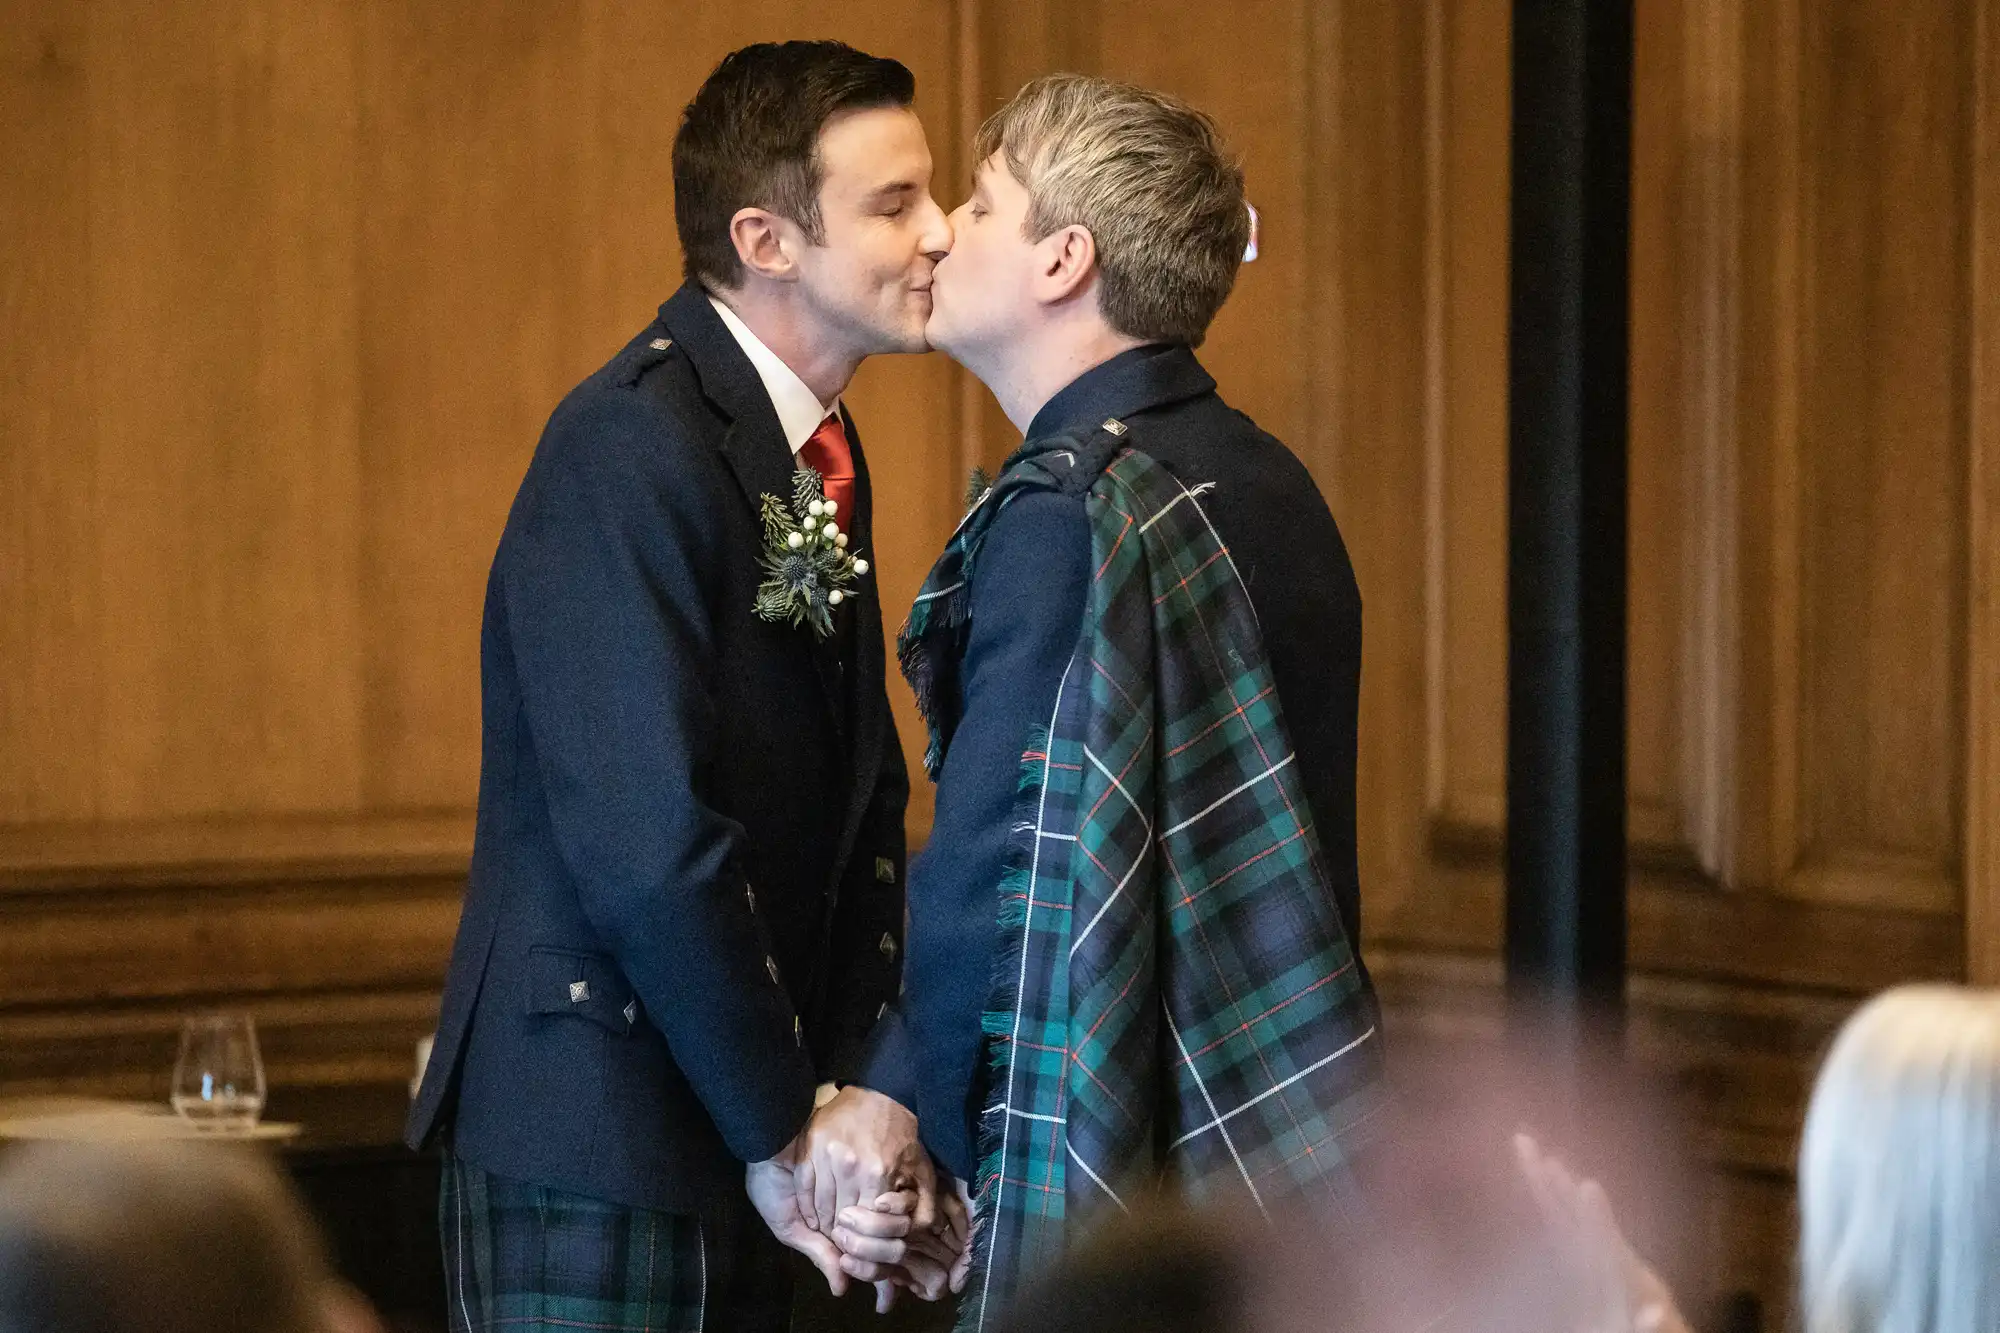 Two men in traditional Scottish attire share a kiss while holding hands in what appears to be a formal event or ceremony in a wooden-paneled room.